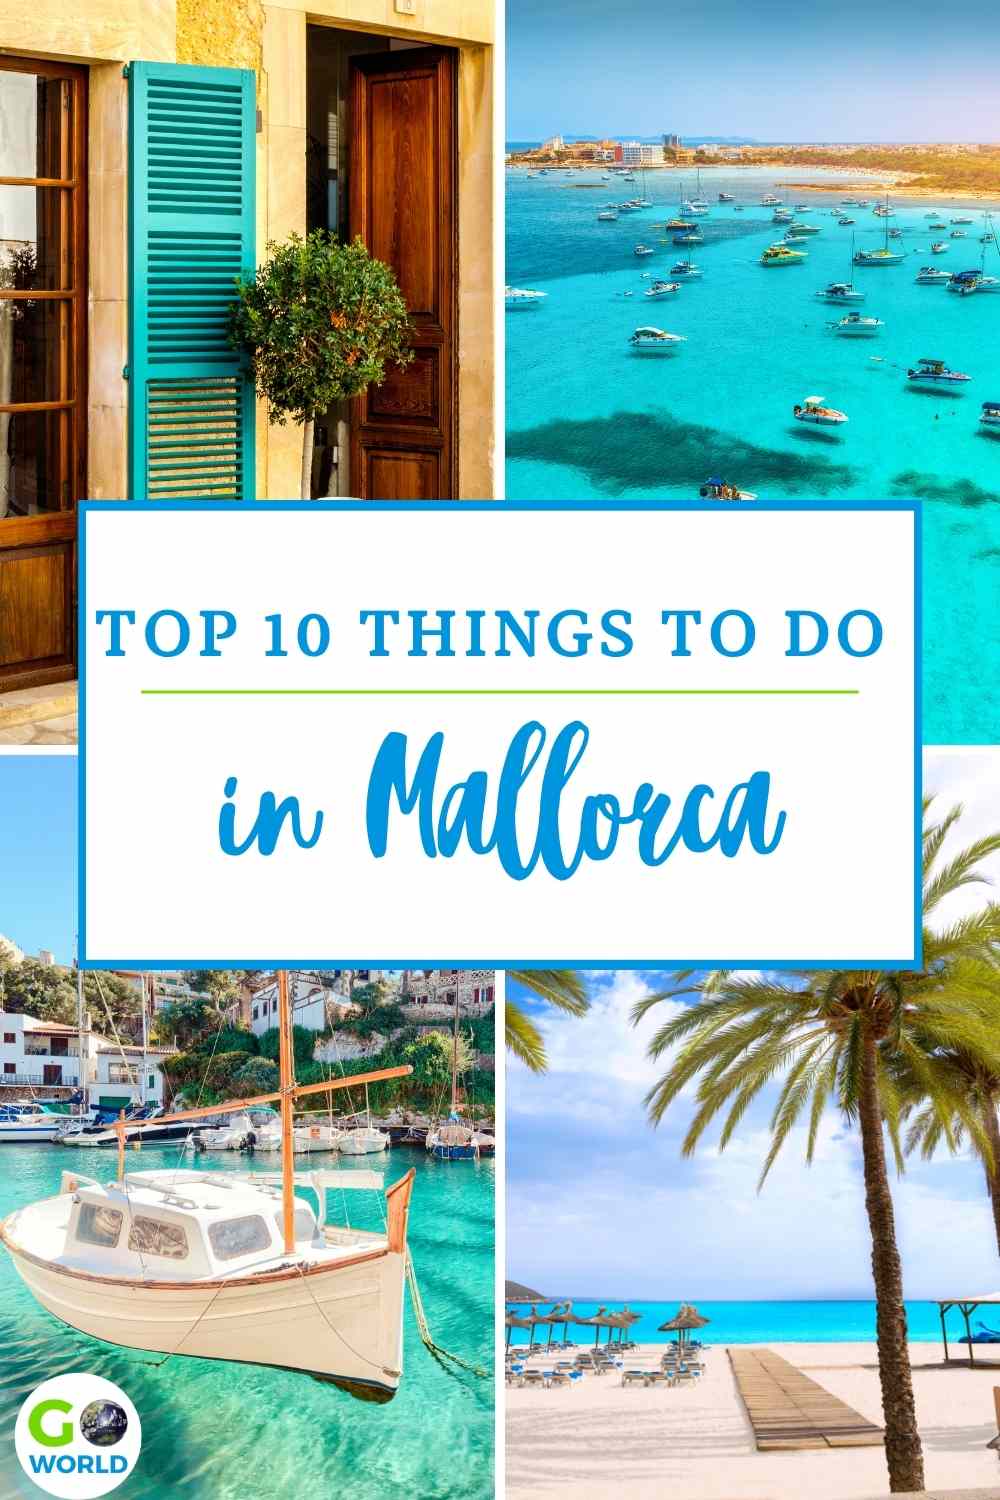 Top 10 Things to Do in Mallorca, Spain 